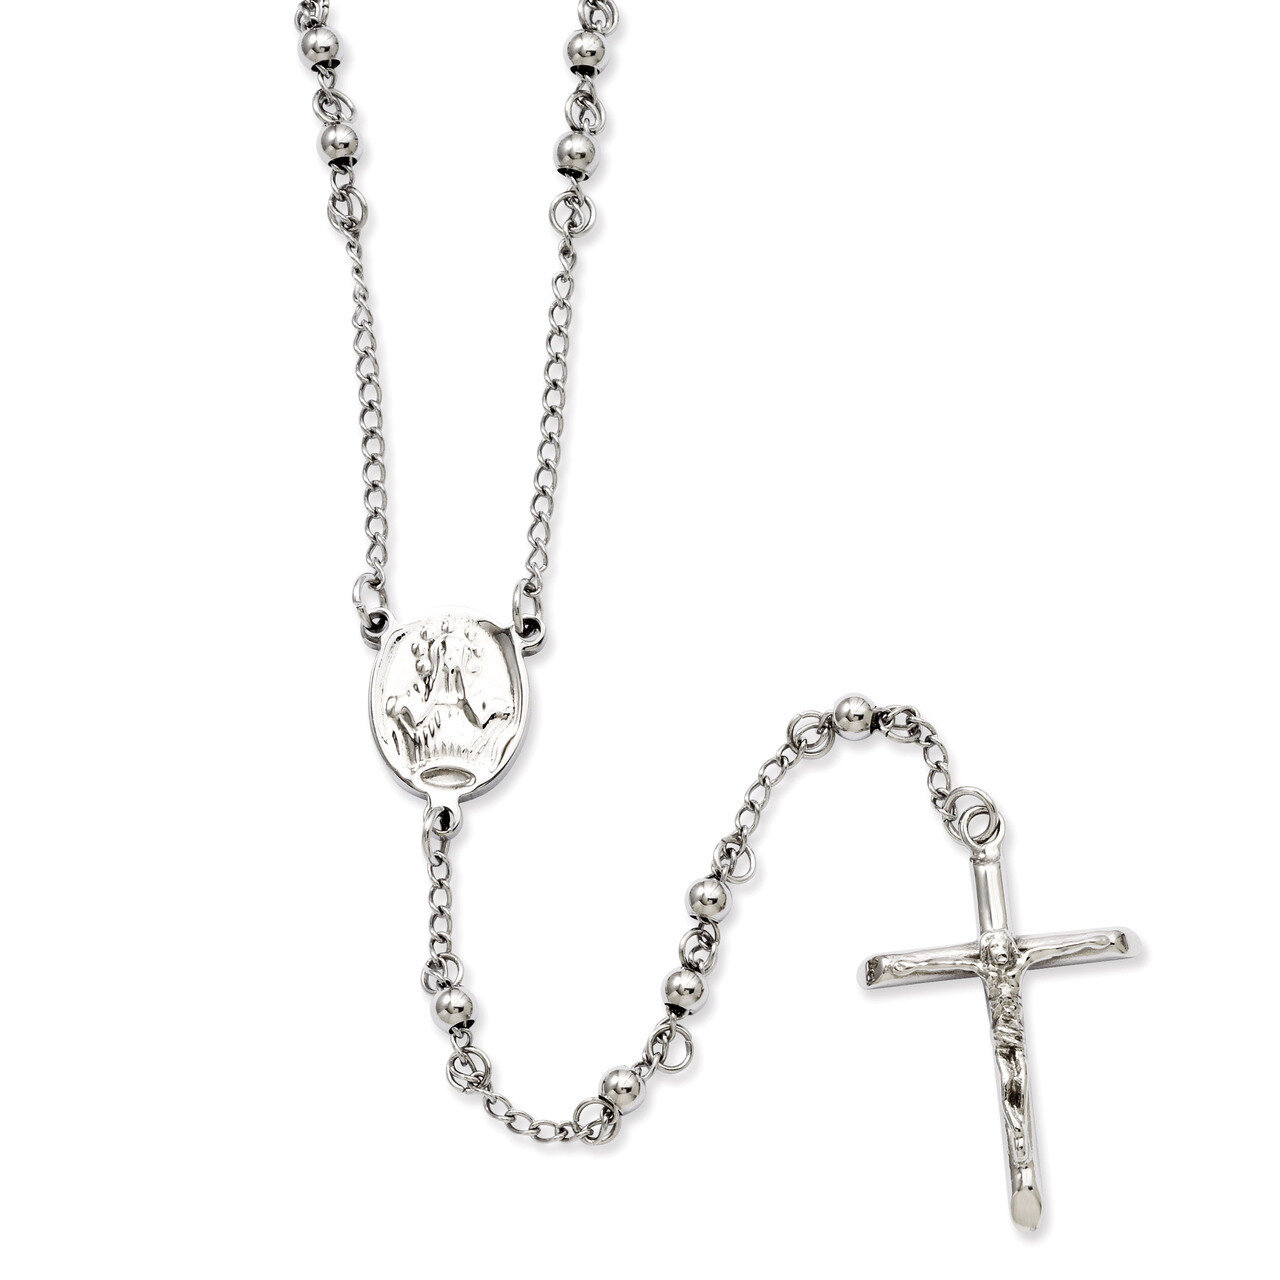 4mm Bead Rosary Necklace - Stainless Steel SRN808